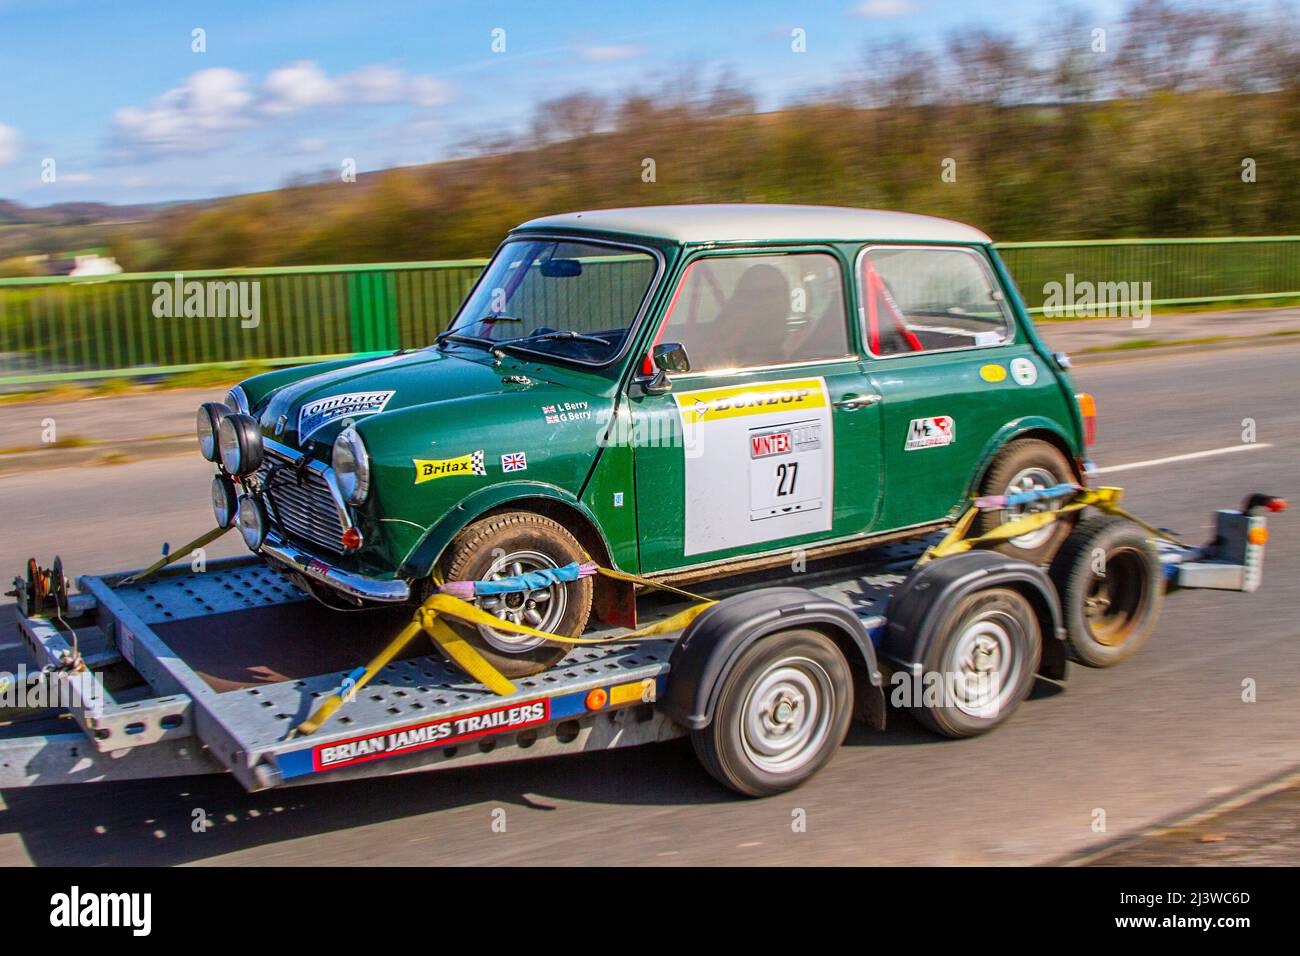 1972 70s seventies sporting green Mini 1200 Leyland Cars 1275cc petrol Rally car No.27 being carried on trailer. Stock Photo